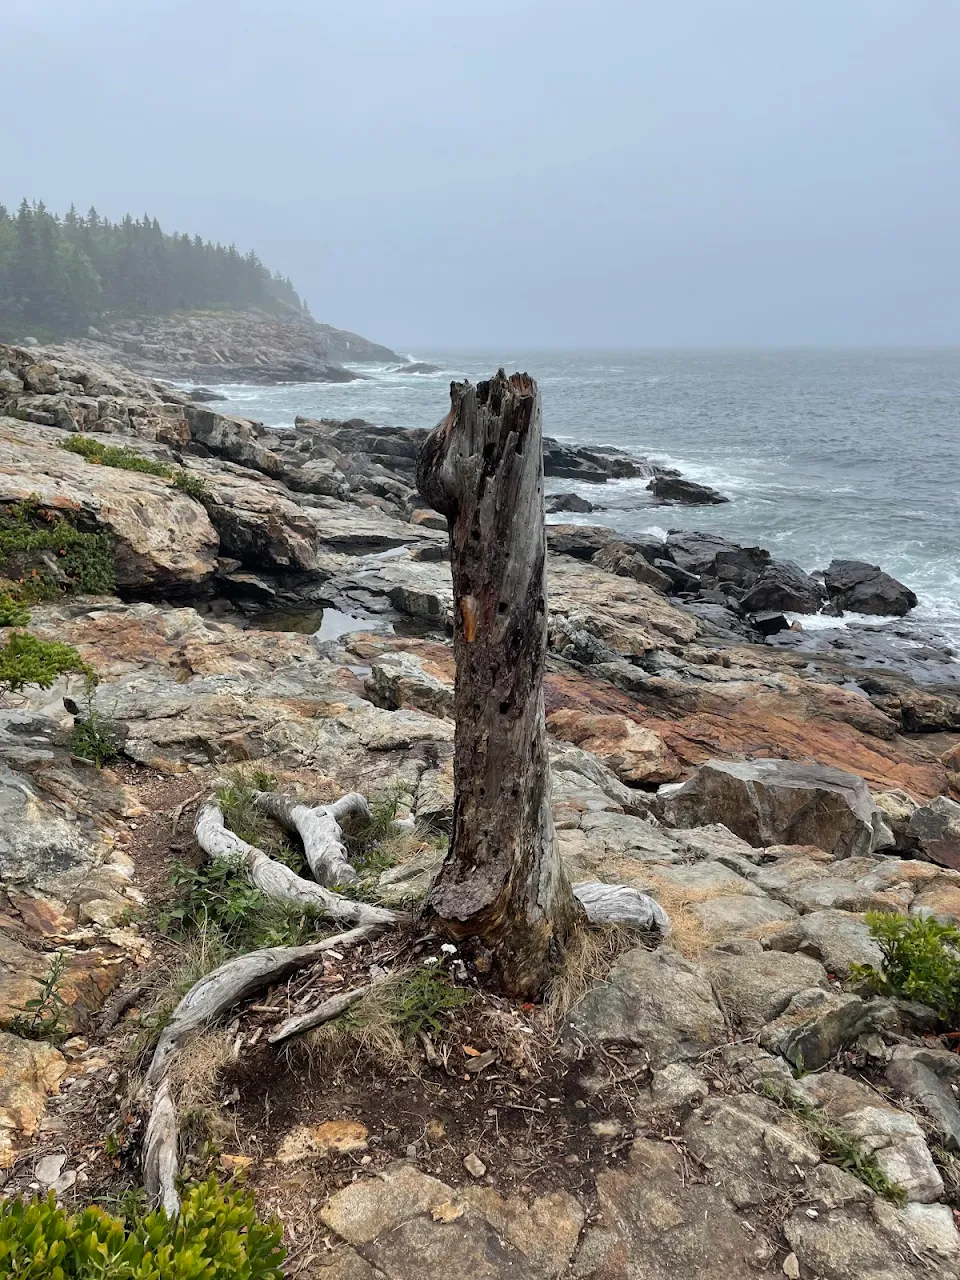 Acadia National Park, ME. I call it “Life and Death”